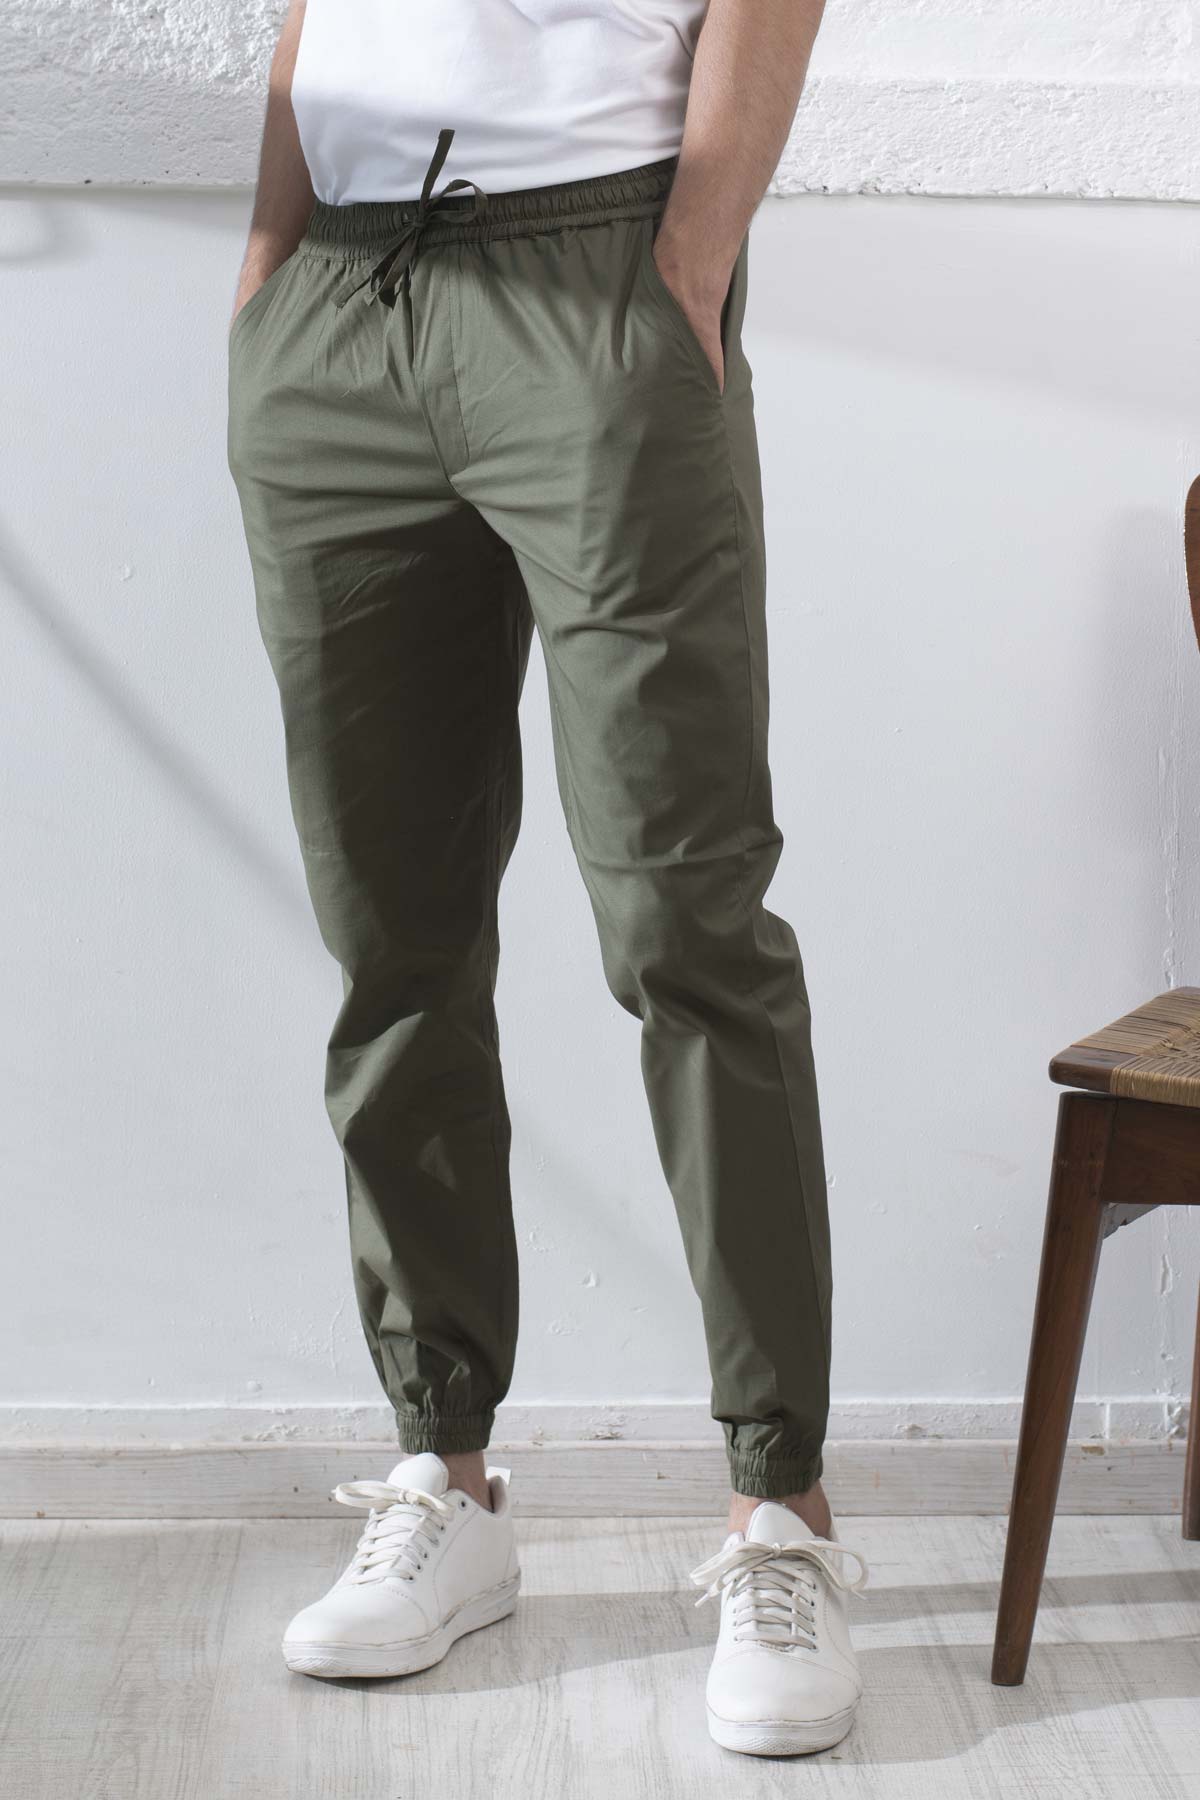 Buy Olive Green Joggers